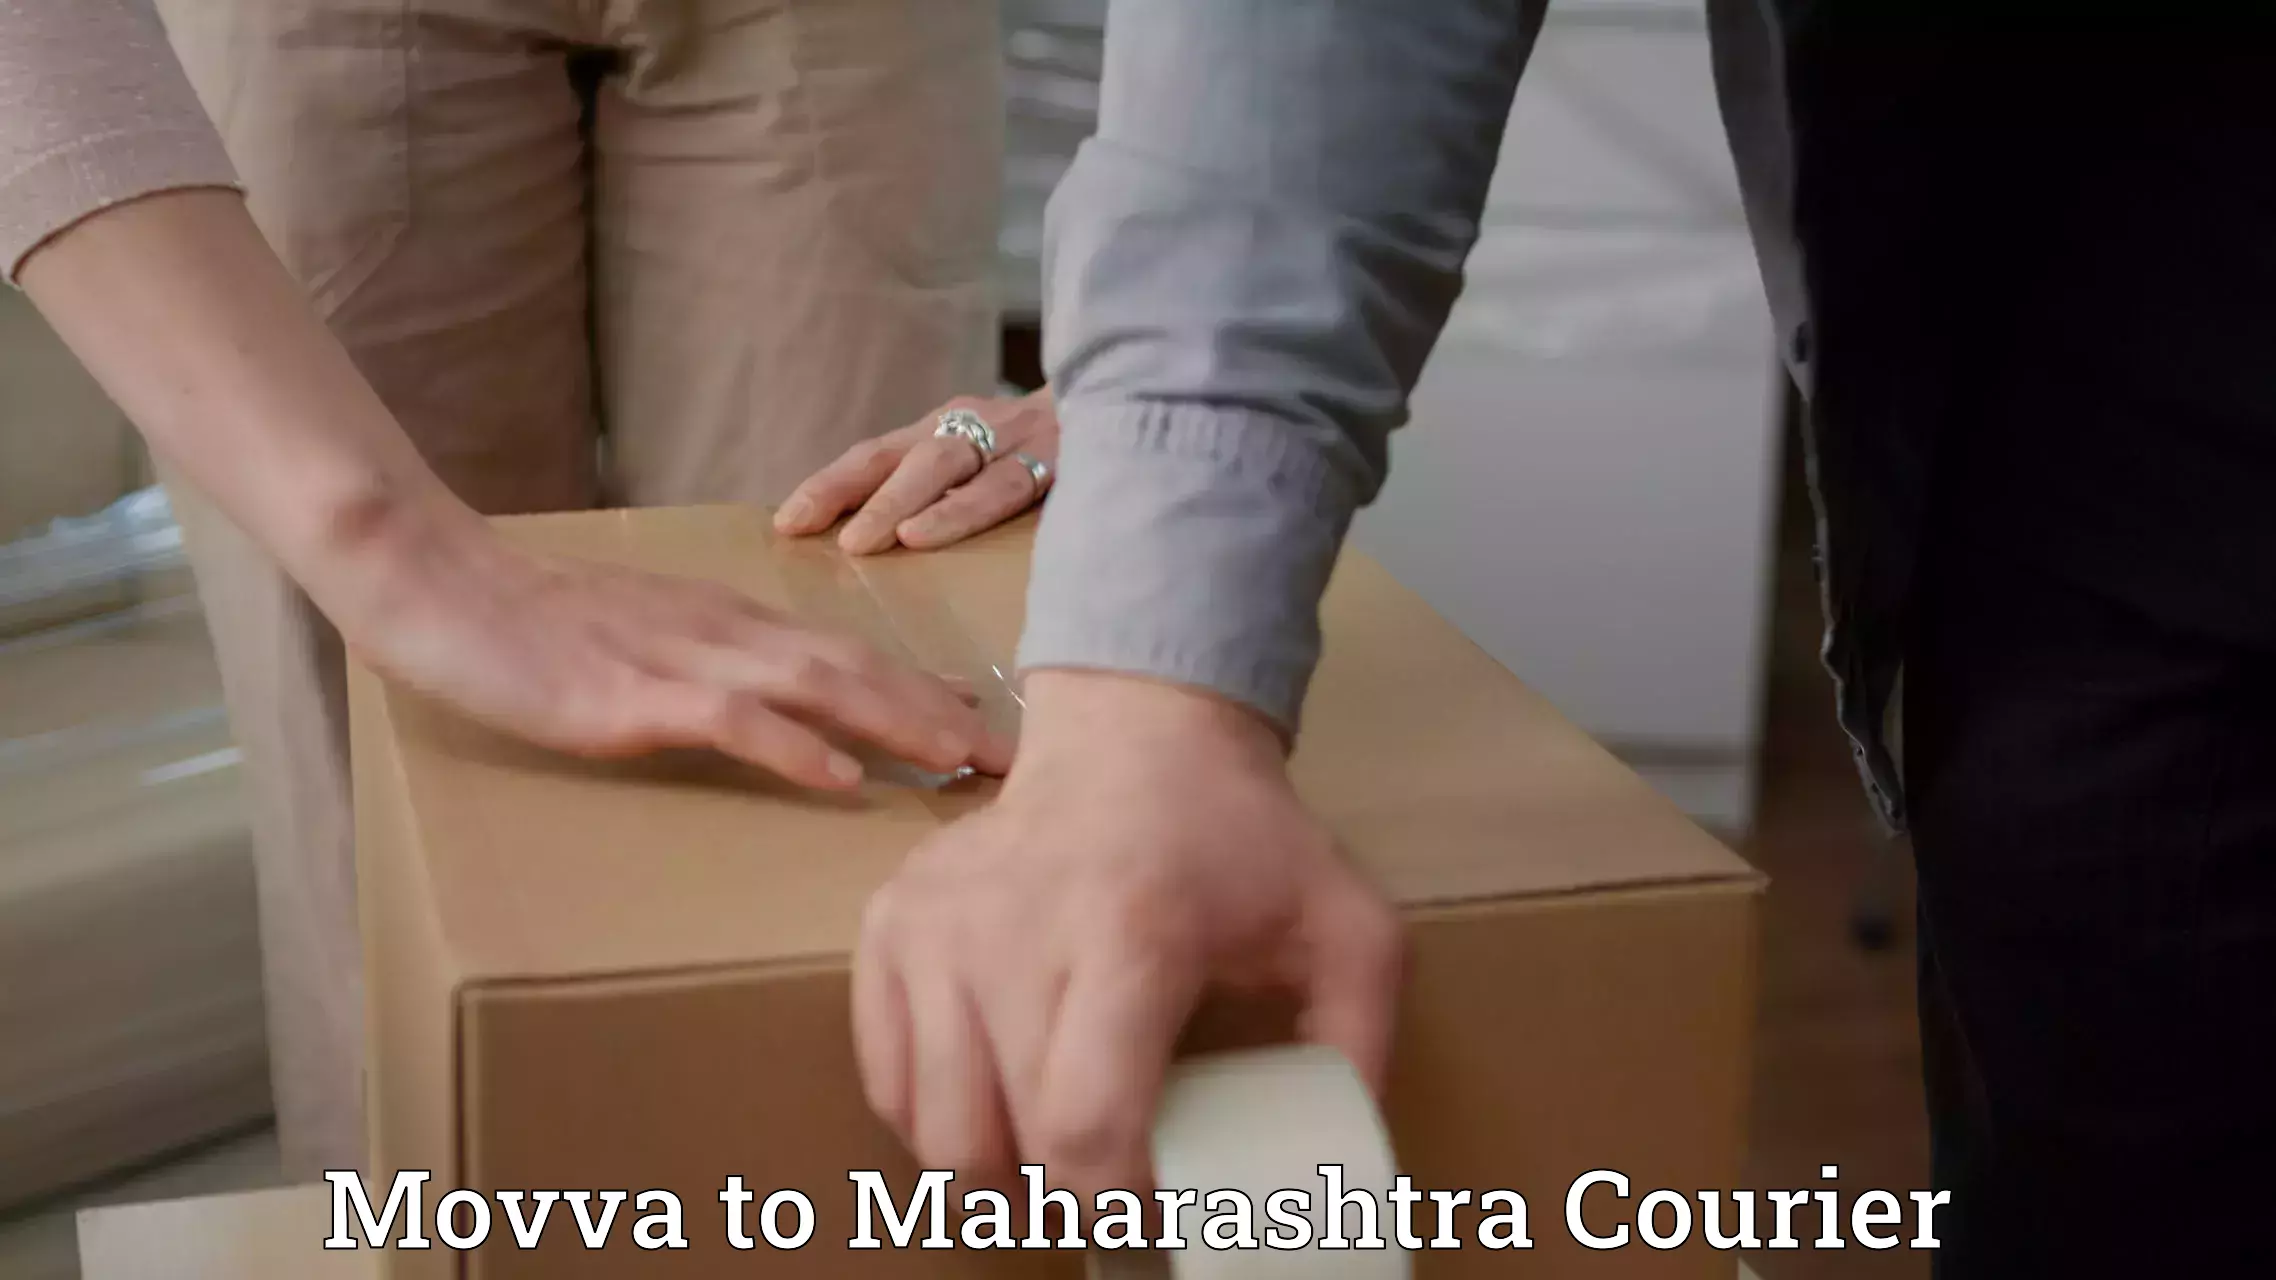 Courier service partnerships Movva to Chalisgaon